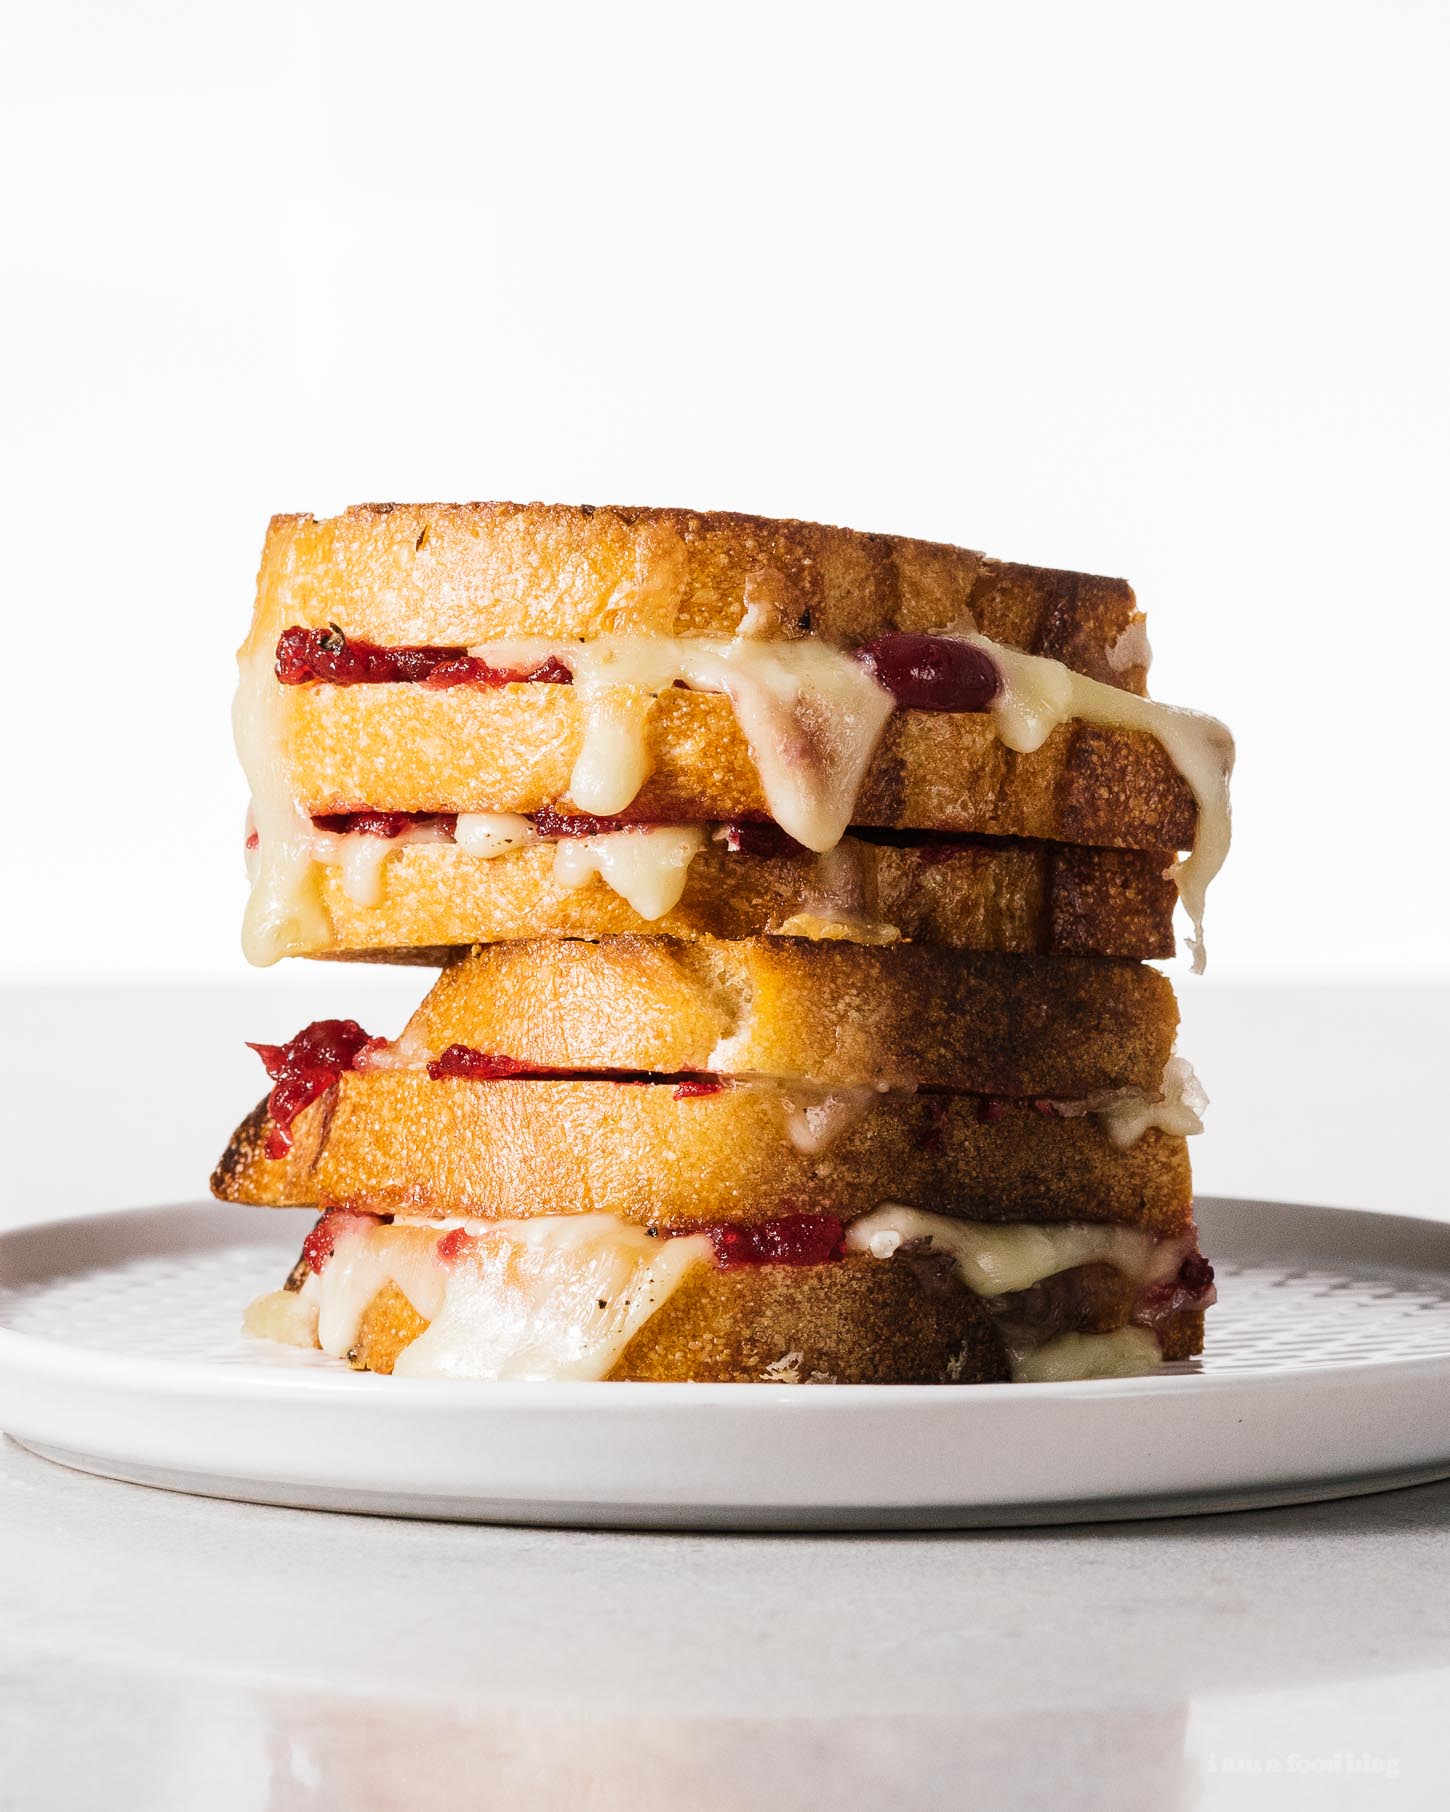 Cranberry and Brie Grilled Cheese | www.iamafoodblog.com